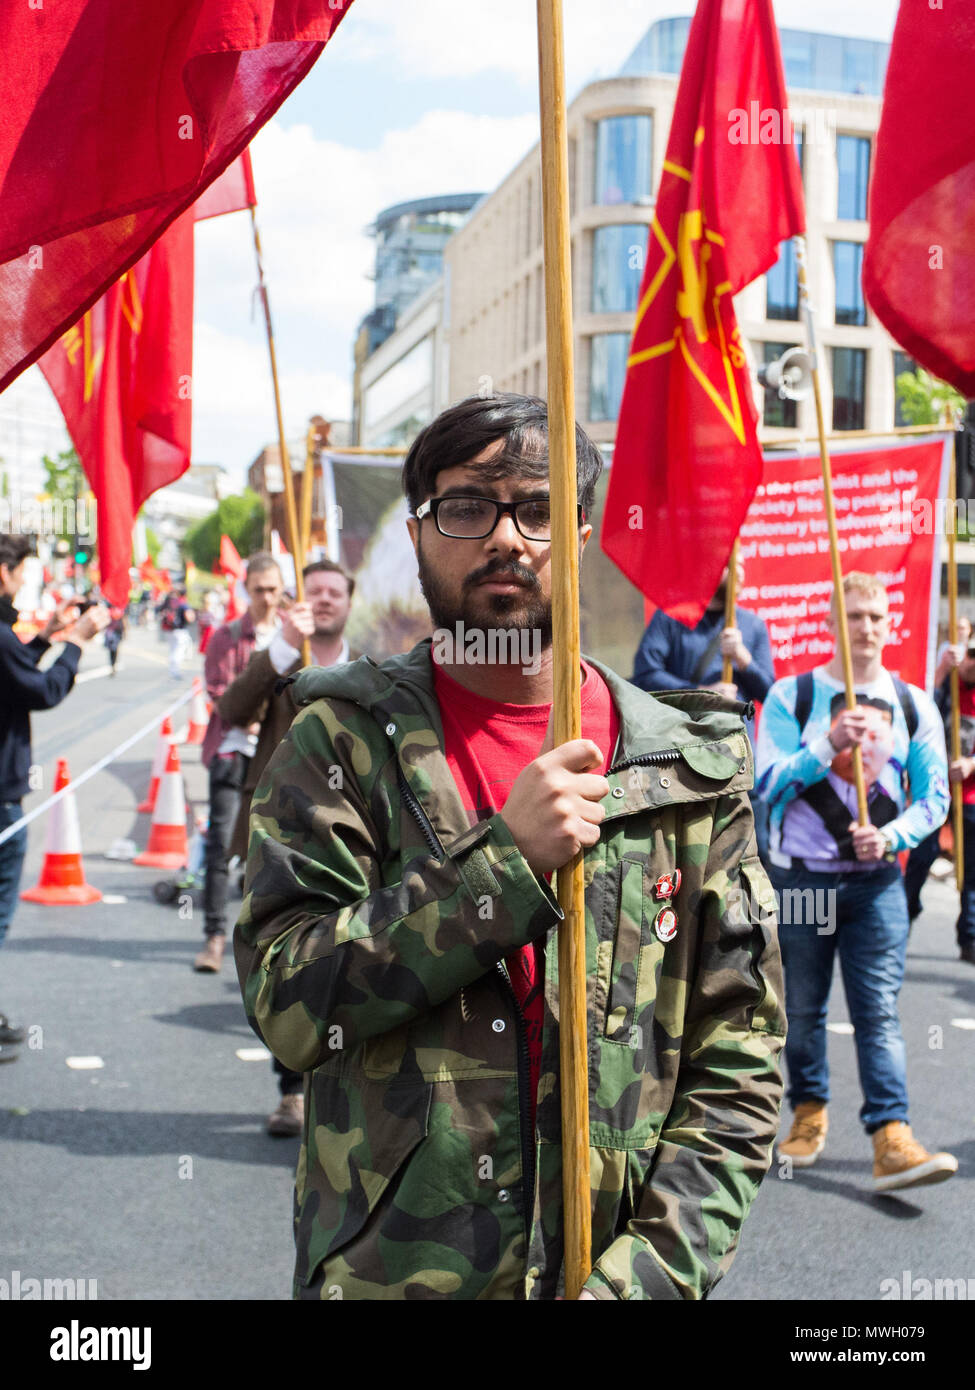 Annual May day march and rally at Trafalgar Square. The march and rally marks International Workers Day, which dates back to union struggles in the late 19th century.  Featuring: Atmosphere, View Where: London, England, United Kingdom When: 01 May 2018 Credit: Wheatley/WENN Stock Photo